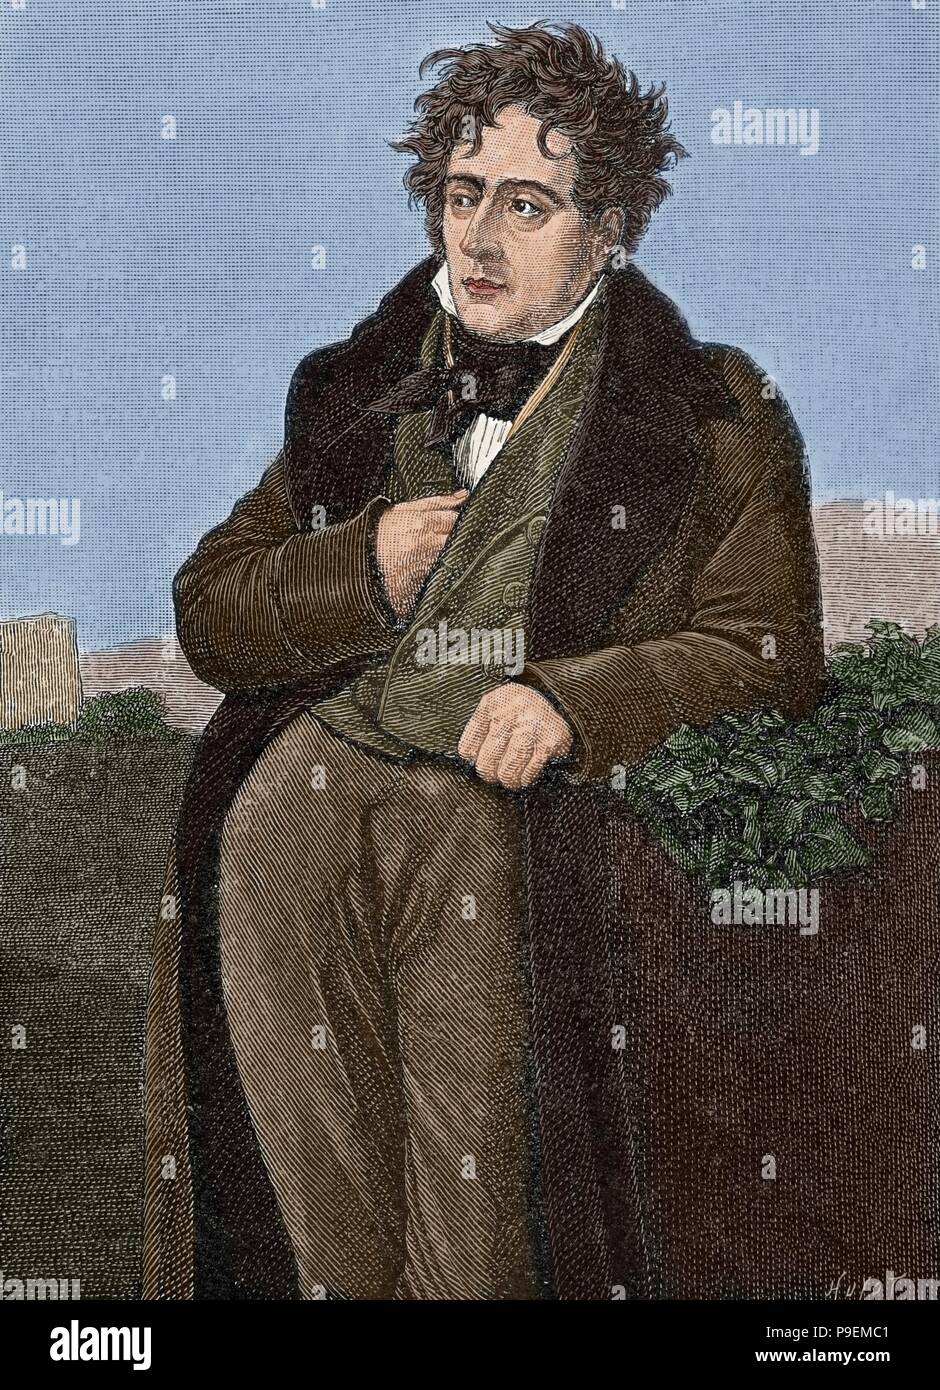 Chateaubriand, Franc ois Rene, Vicomte de (1768-1848). French writer and member of the French Academy (1811). Portrait. Engraving by Huyot. 'Historia de Francia', 1883. Colored. Stock Photo